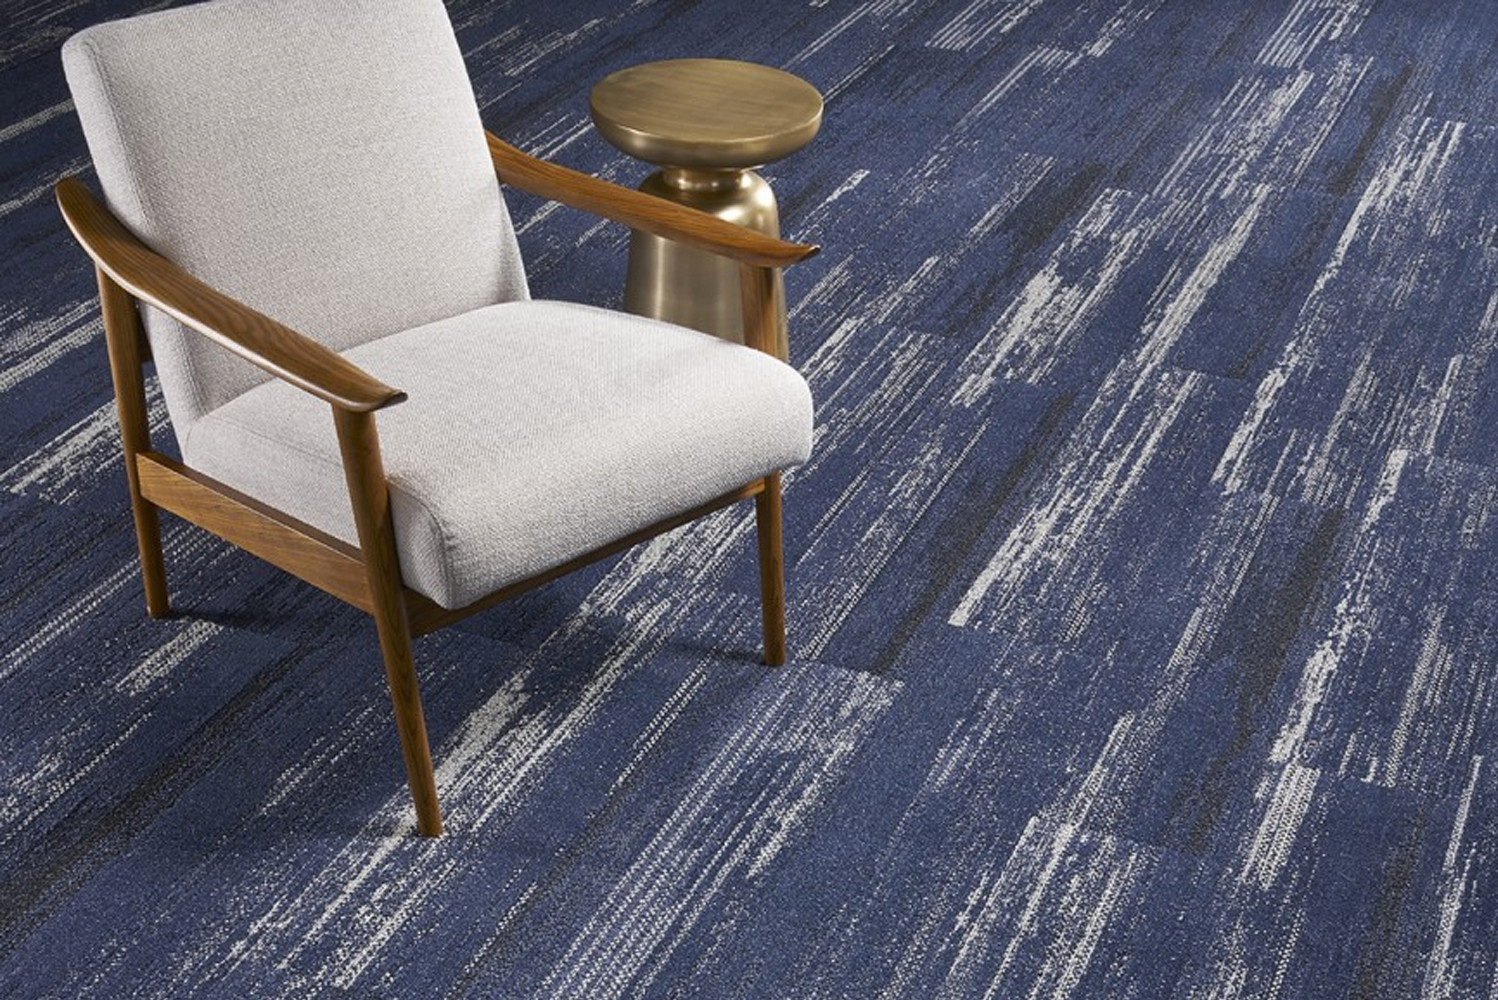 The solution-dyed carpet tiles are made with a type 6 nylon fibermanufactured by Bristol Vabased Universal Fibersw